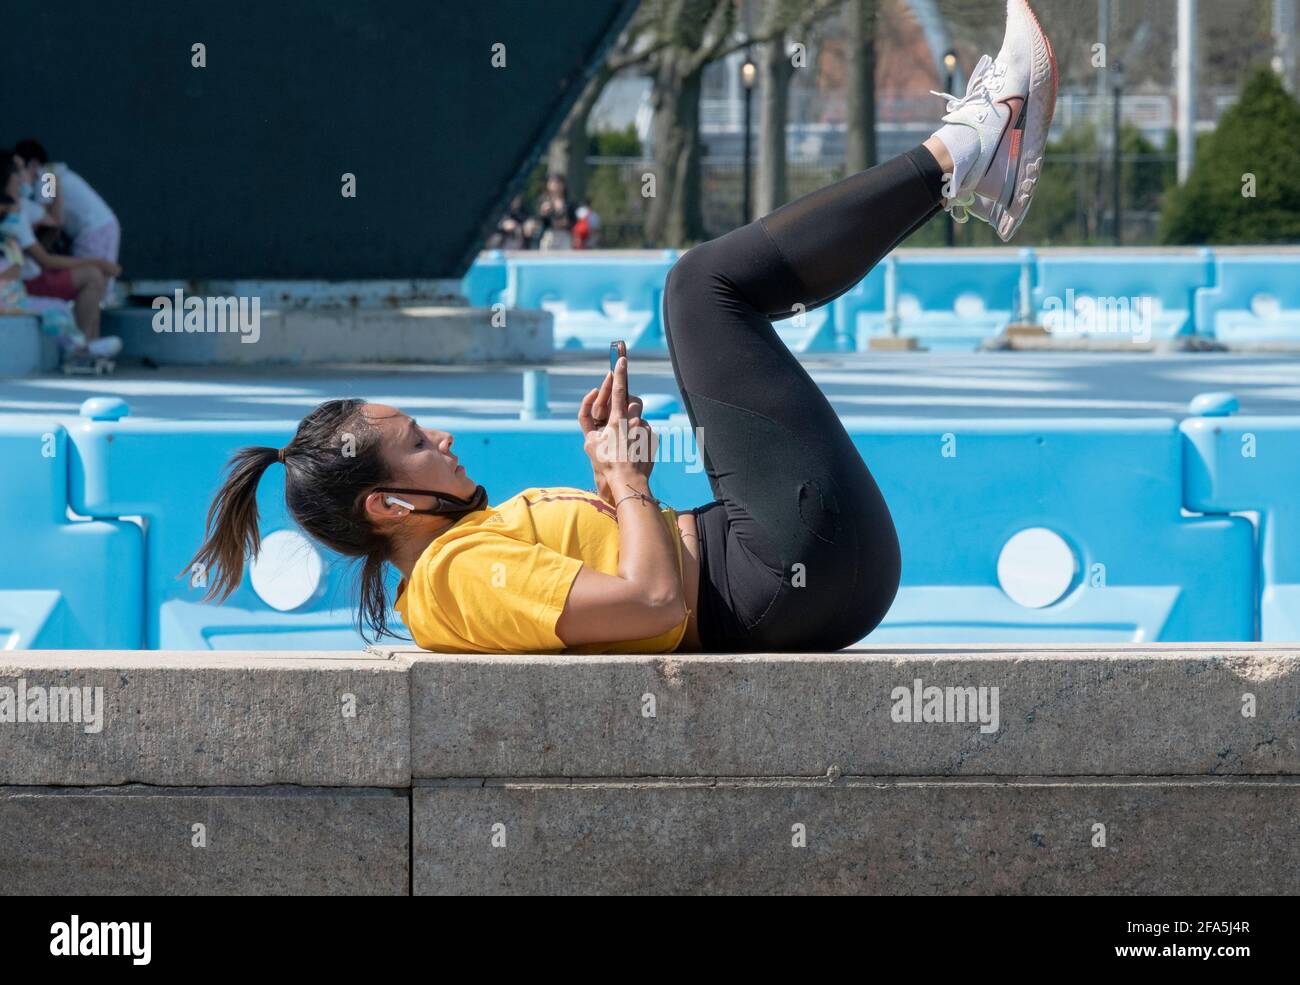 A fit woman pauses from her workout routine to check her phone. In Queens, New York City Stock Photo